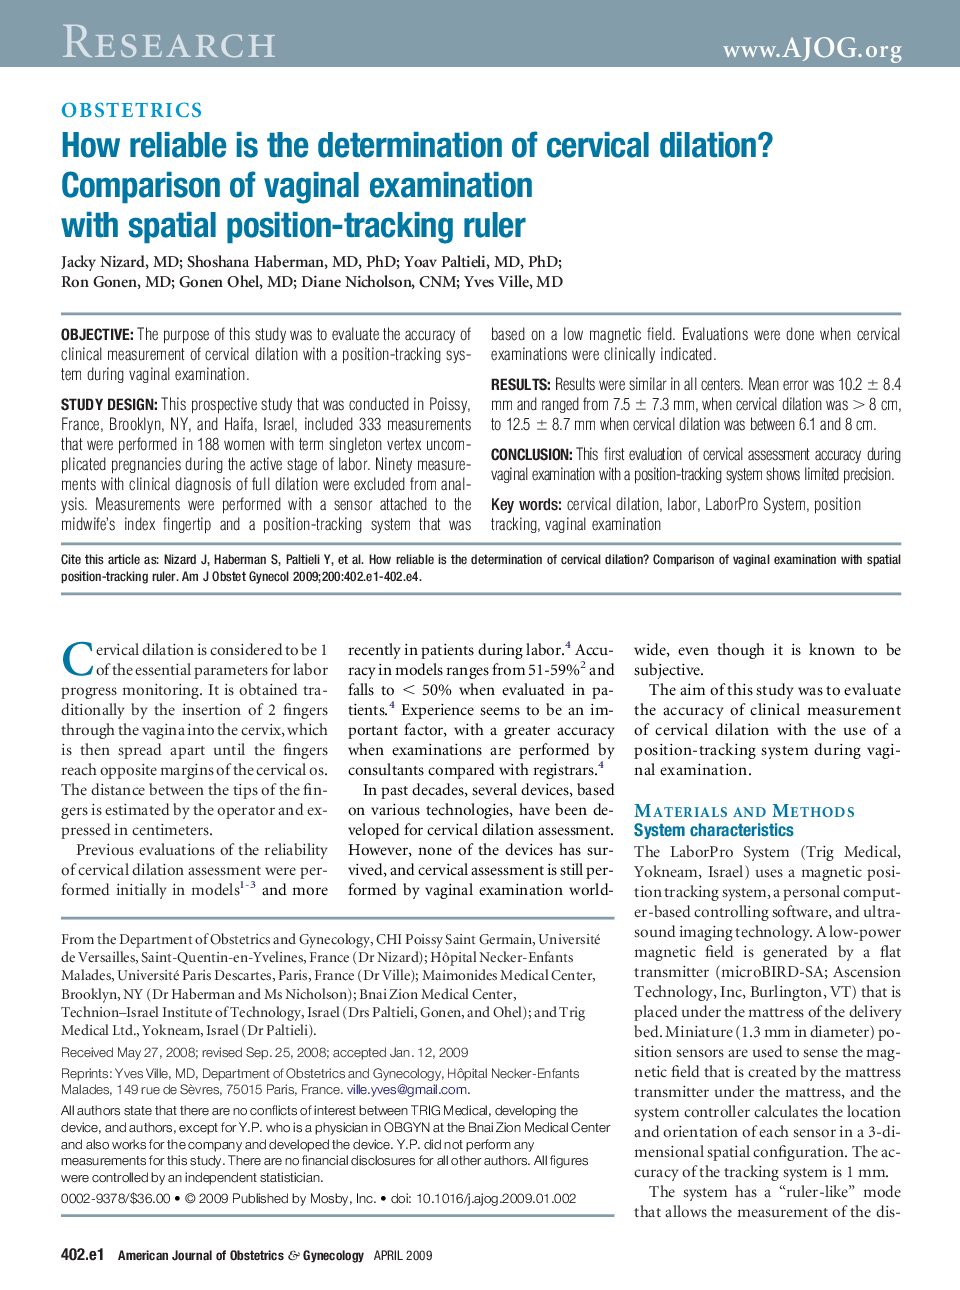 How reliable is the determination of cervical dilation? Comparison of vaginal examination with spatial position-tracking ruler